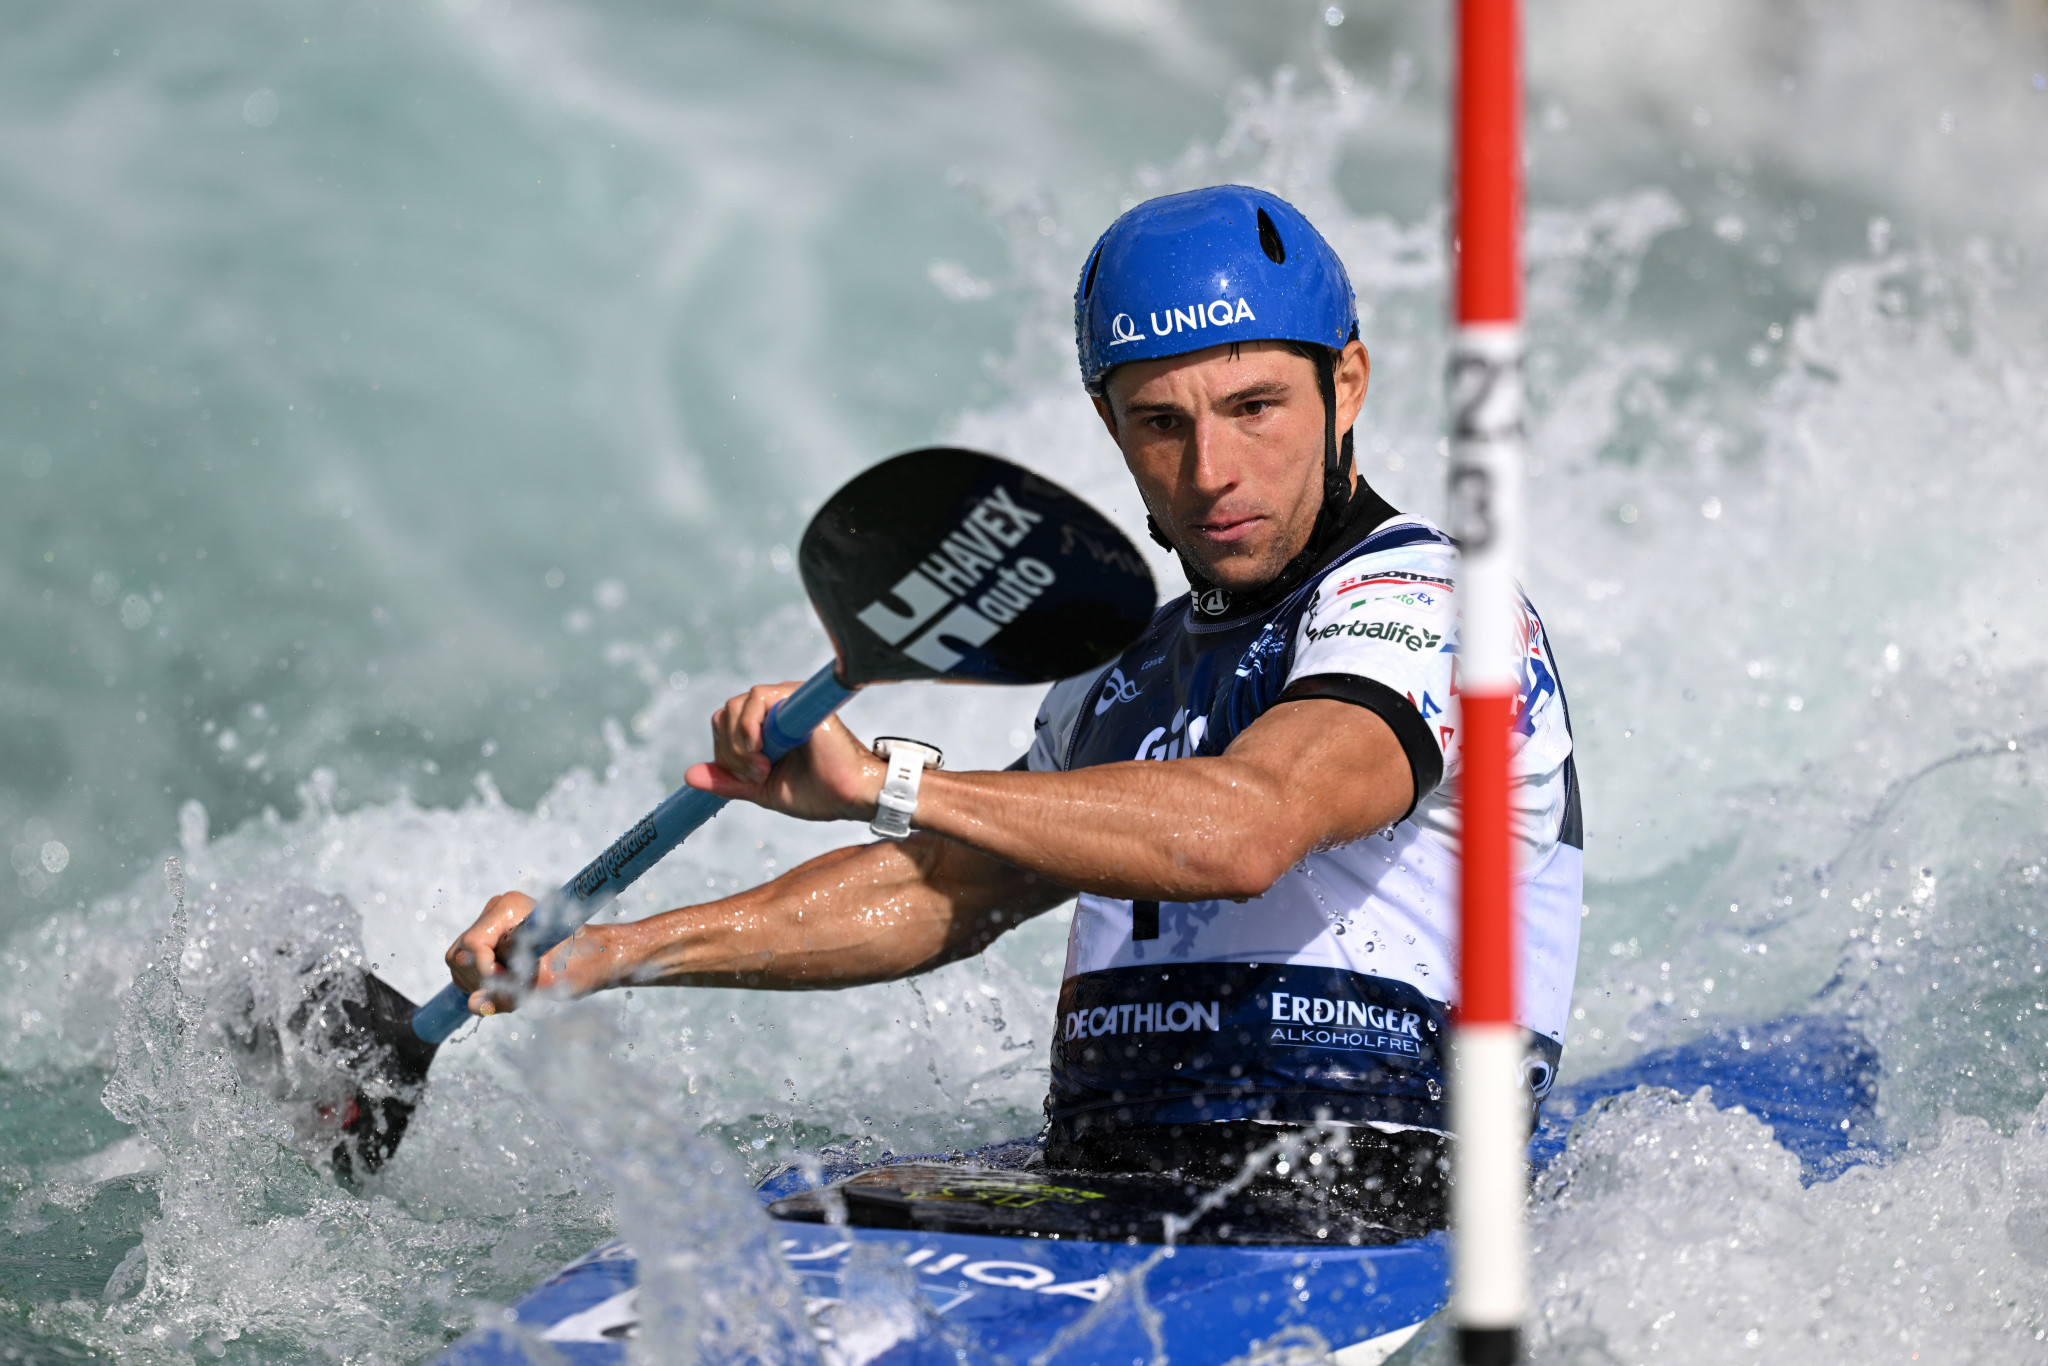 Olympic champion Jiří Prskavec of the Czech Republic comfortably progressed through the first run of the men's kayak heats at Lee Valley ©Getty Images